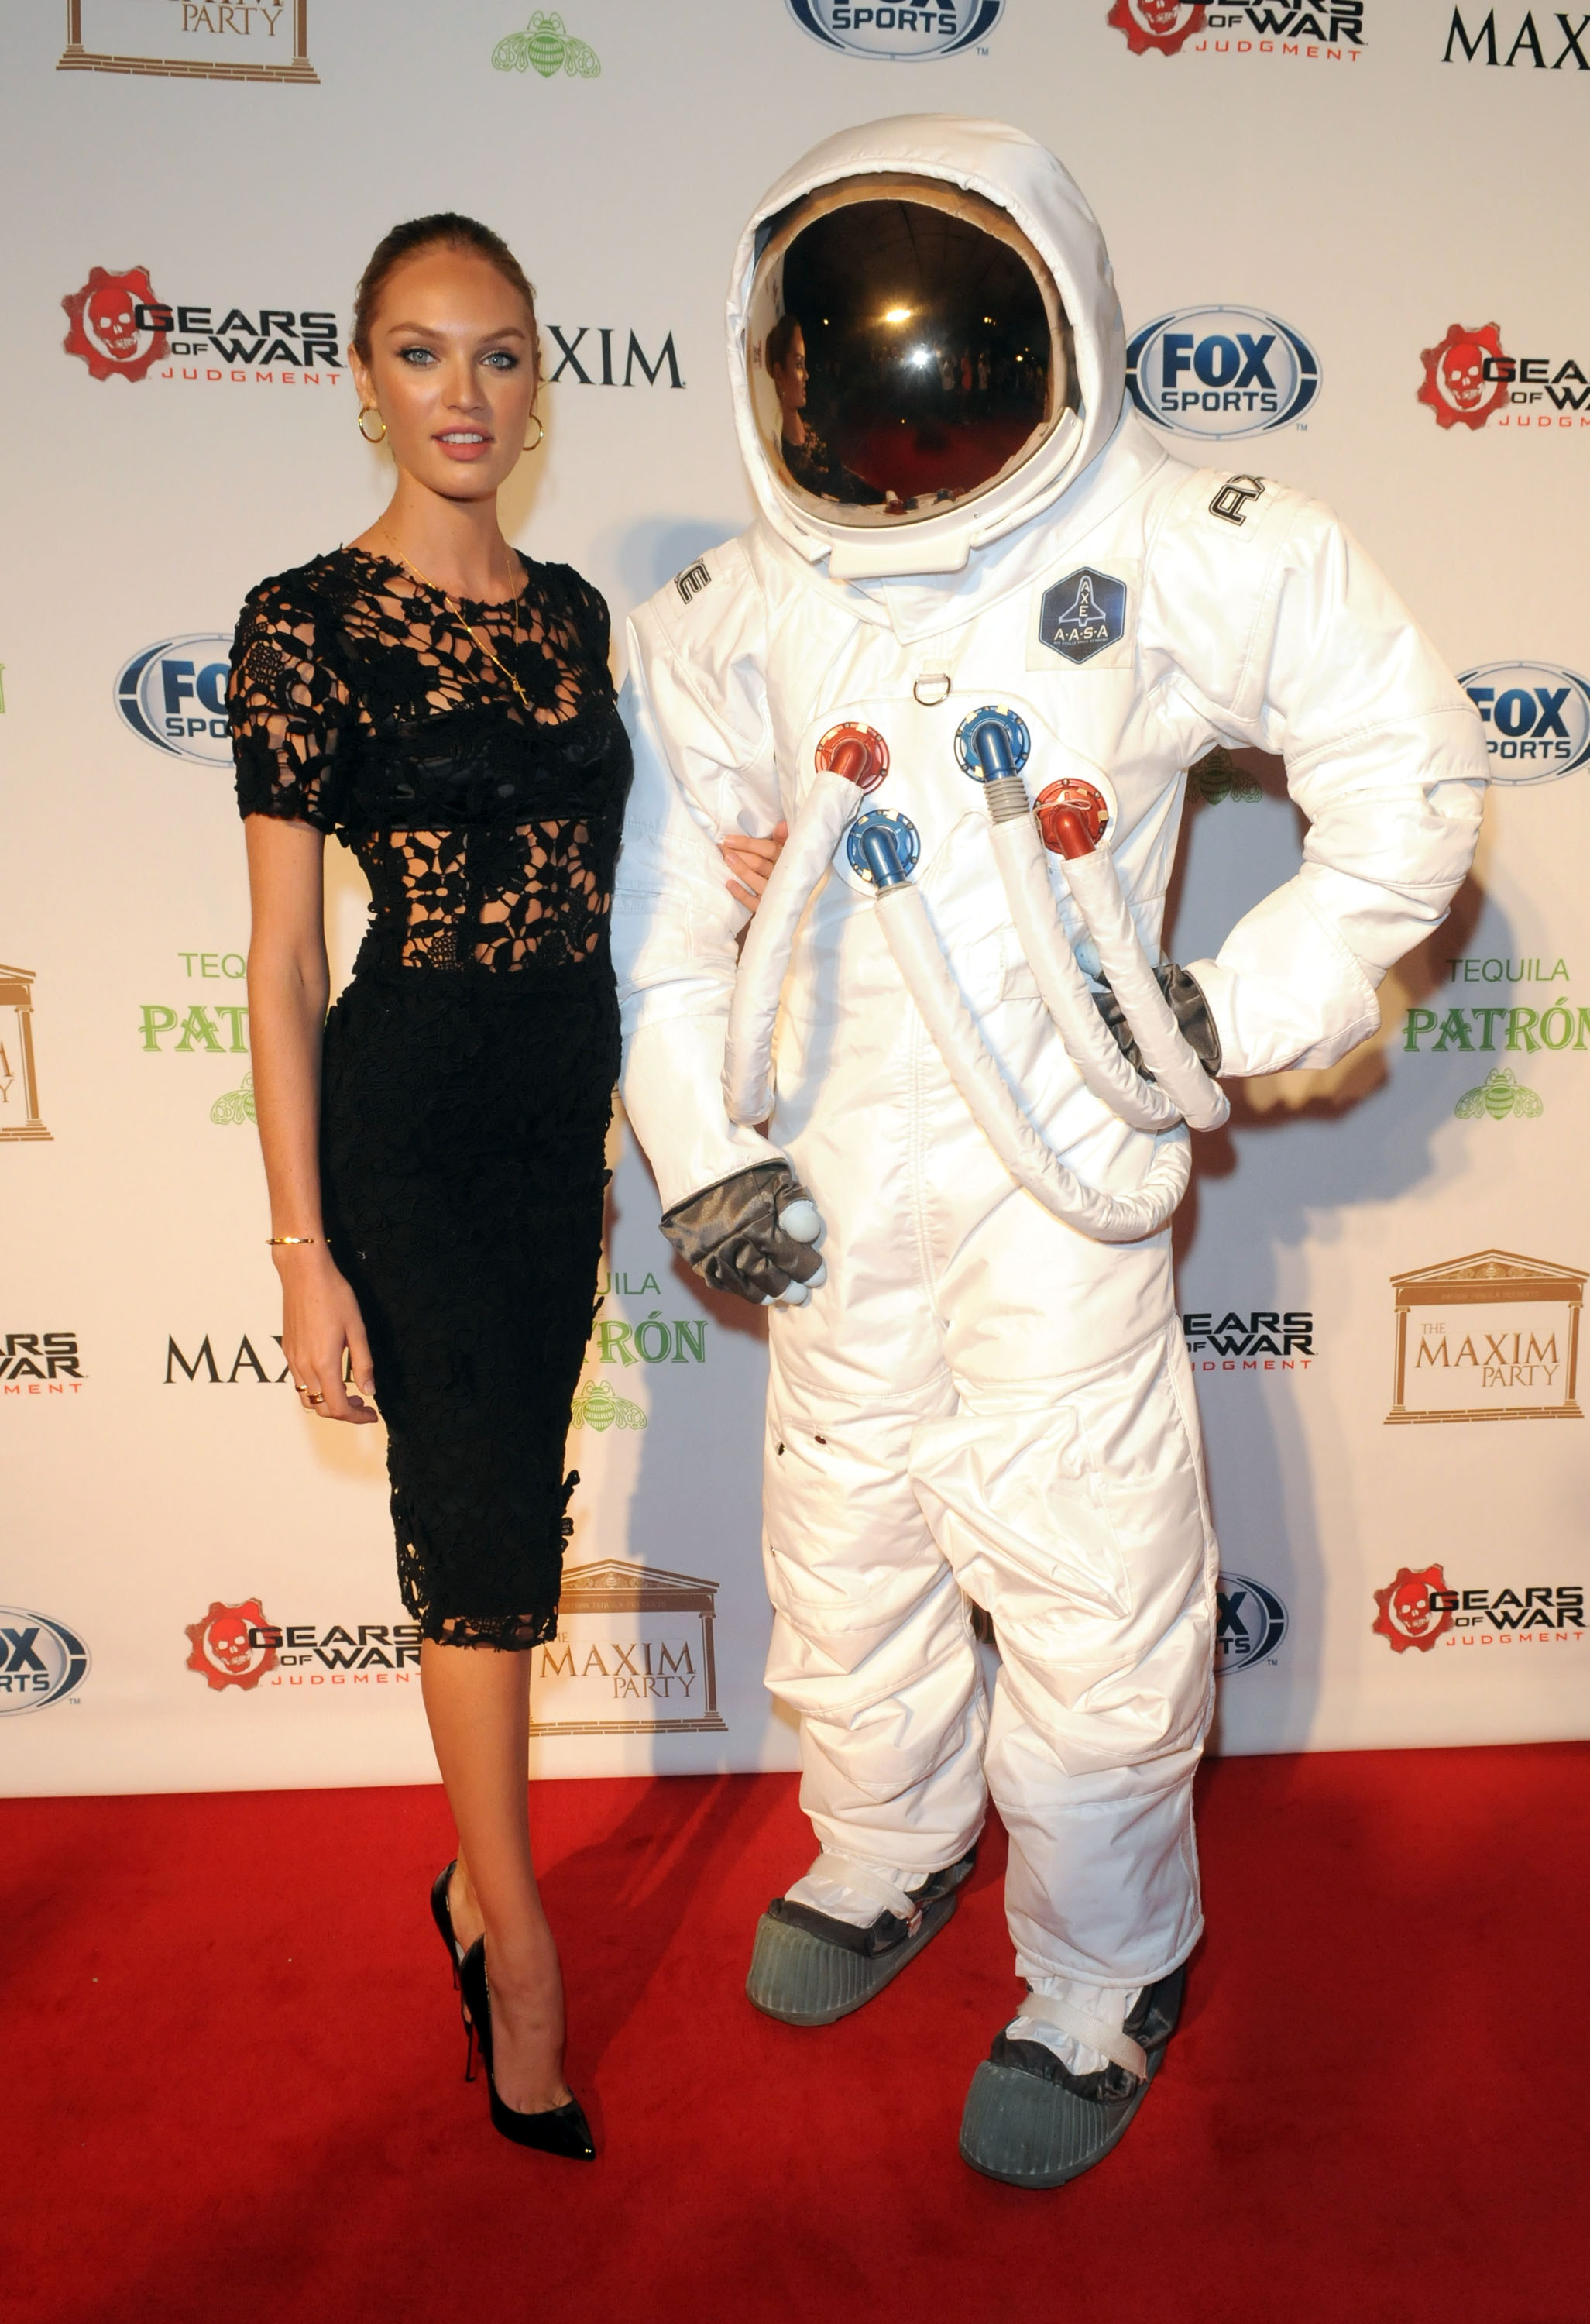 NEW ORLEANS, LA - FEBRUARY 02:  Model Candice Swanepoel and the AXE Astronaut attend The Maxim Party With "Gears of War: Judgment" For XBOX 360, FOX Sports & Starter Presented by Patron Tequila at Second Line Warehouse on February 1, 2013 in New Orleans, Louisiana.  (Photo by Gerardo Mora/Getty Images for Maxim)